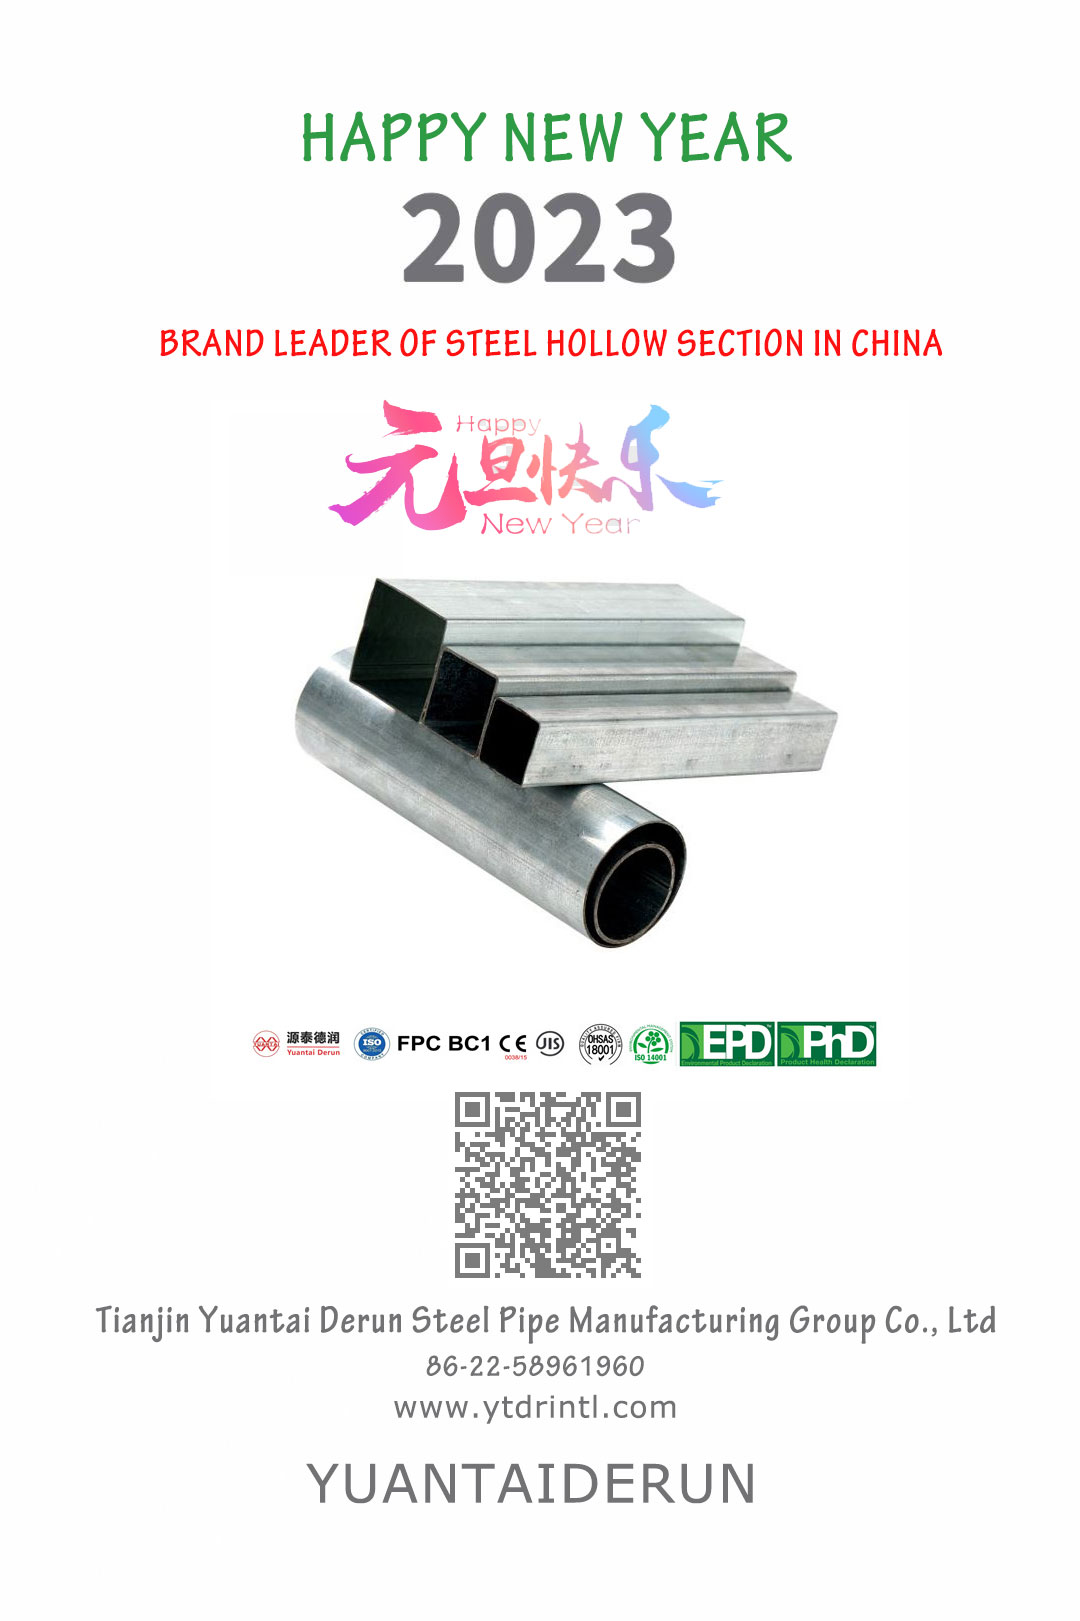 Happy-new-year-2023-yuantai-derun-steel-pipe-group